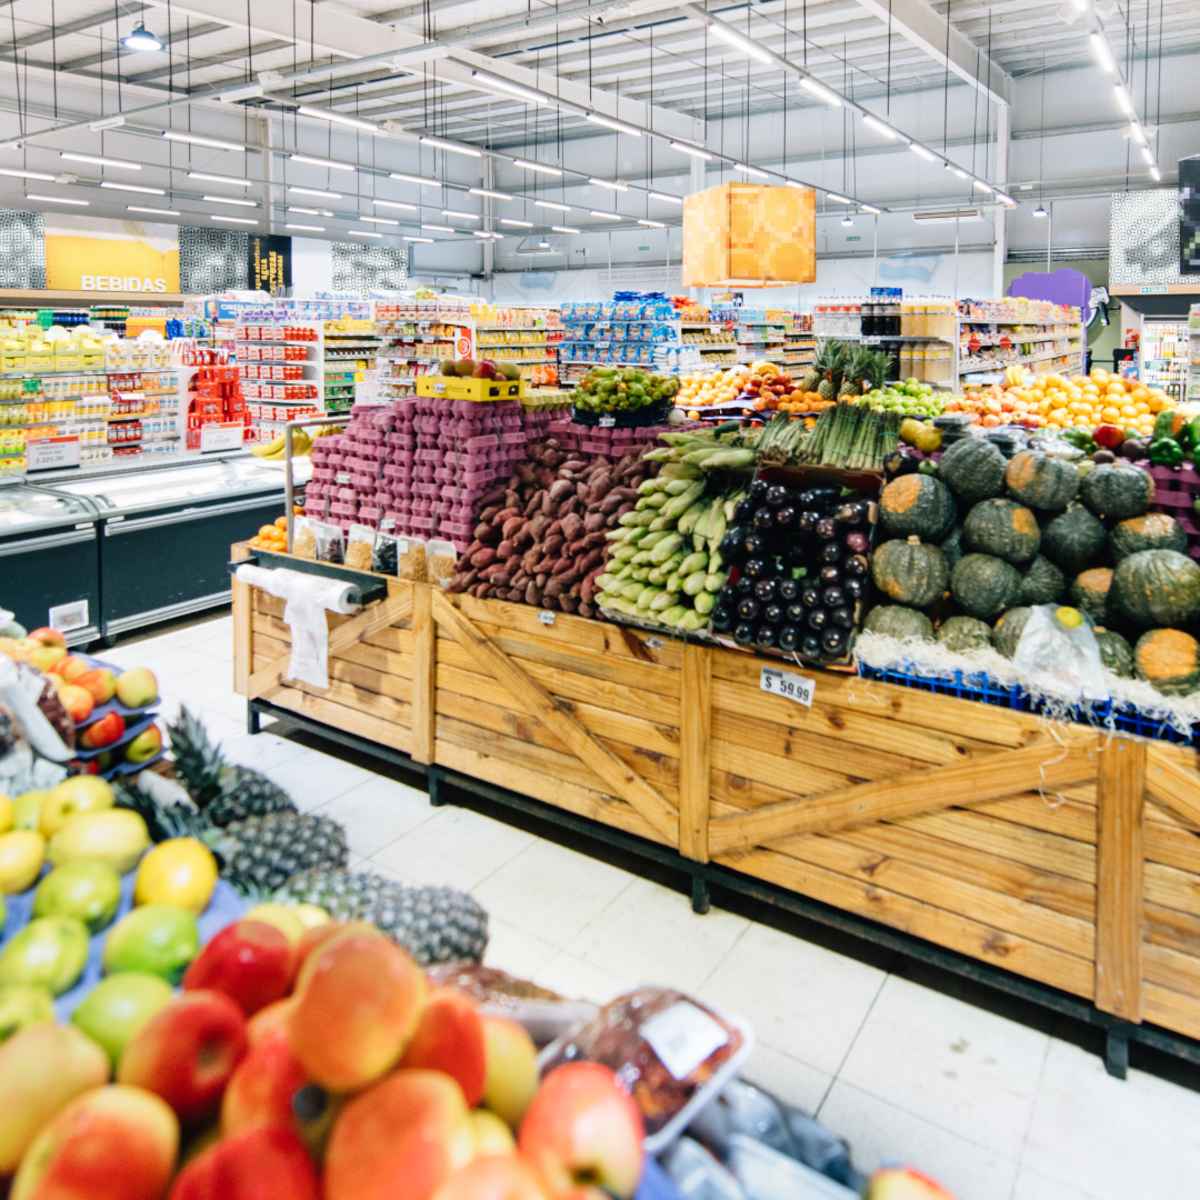 Are supermarkets good for the local community? Or do they hurt local shops?